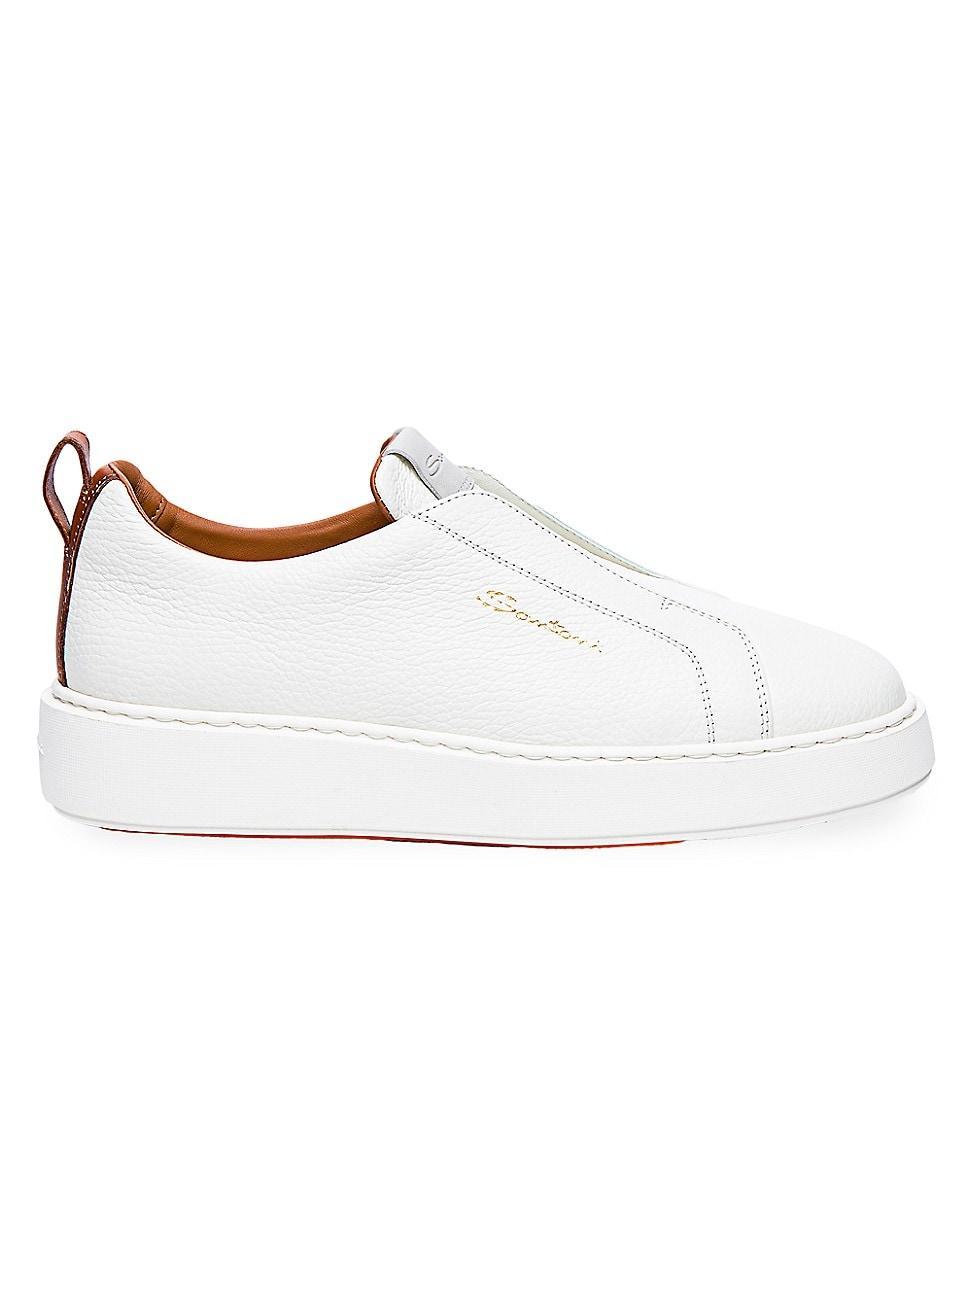 Womens Vicky Leather Slip-On Sneakers Product Image